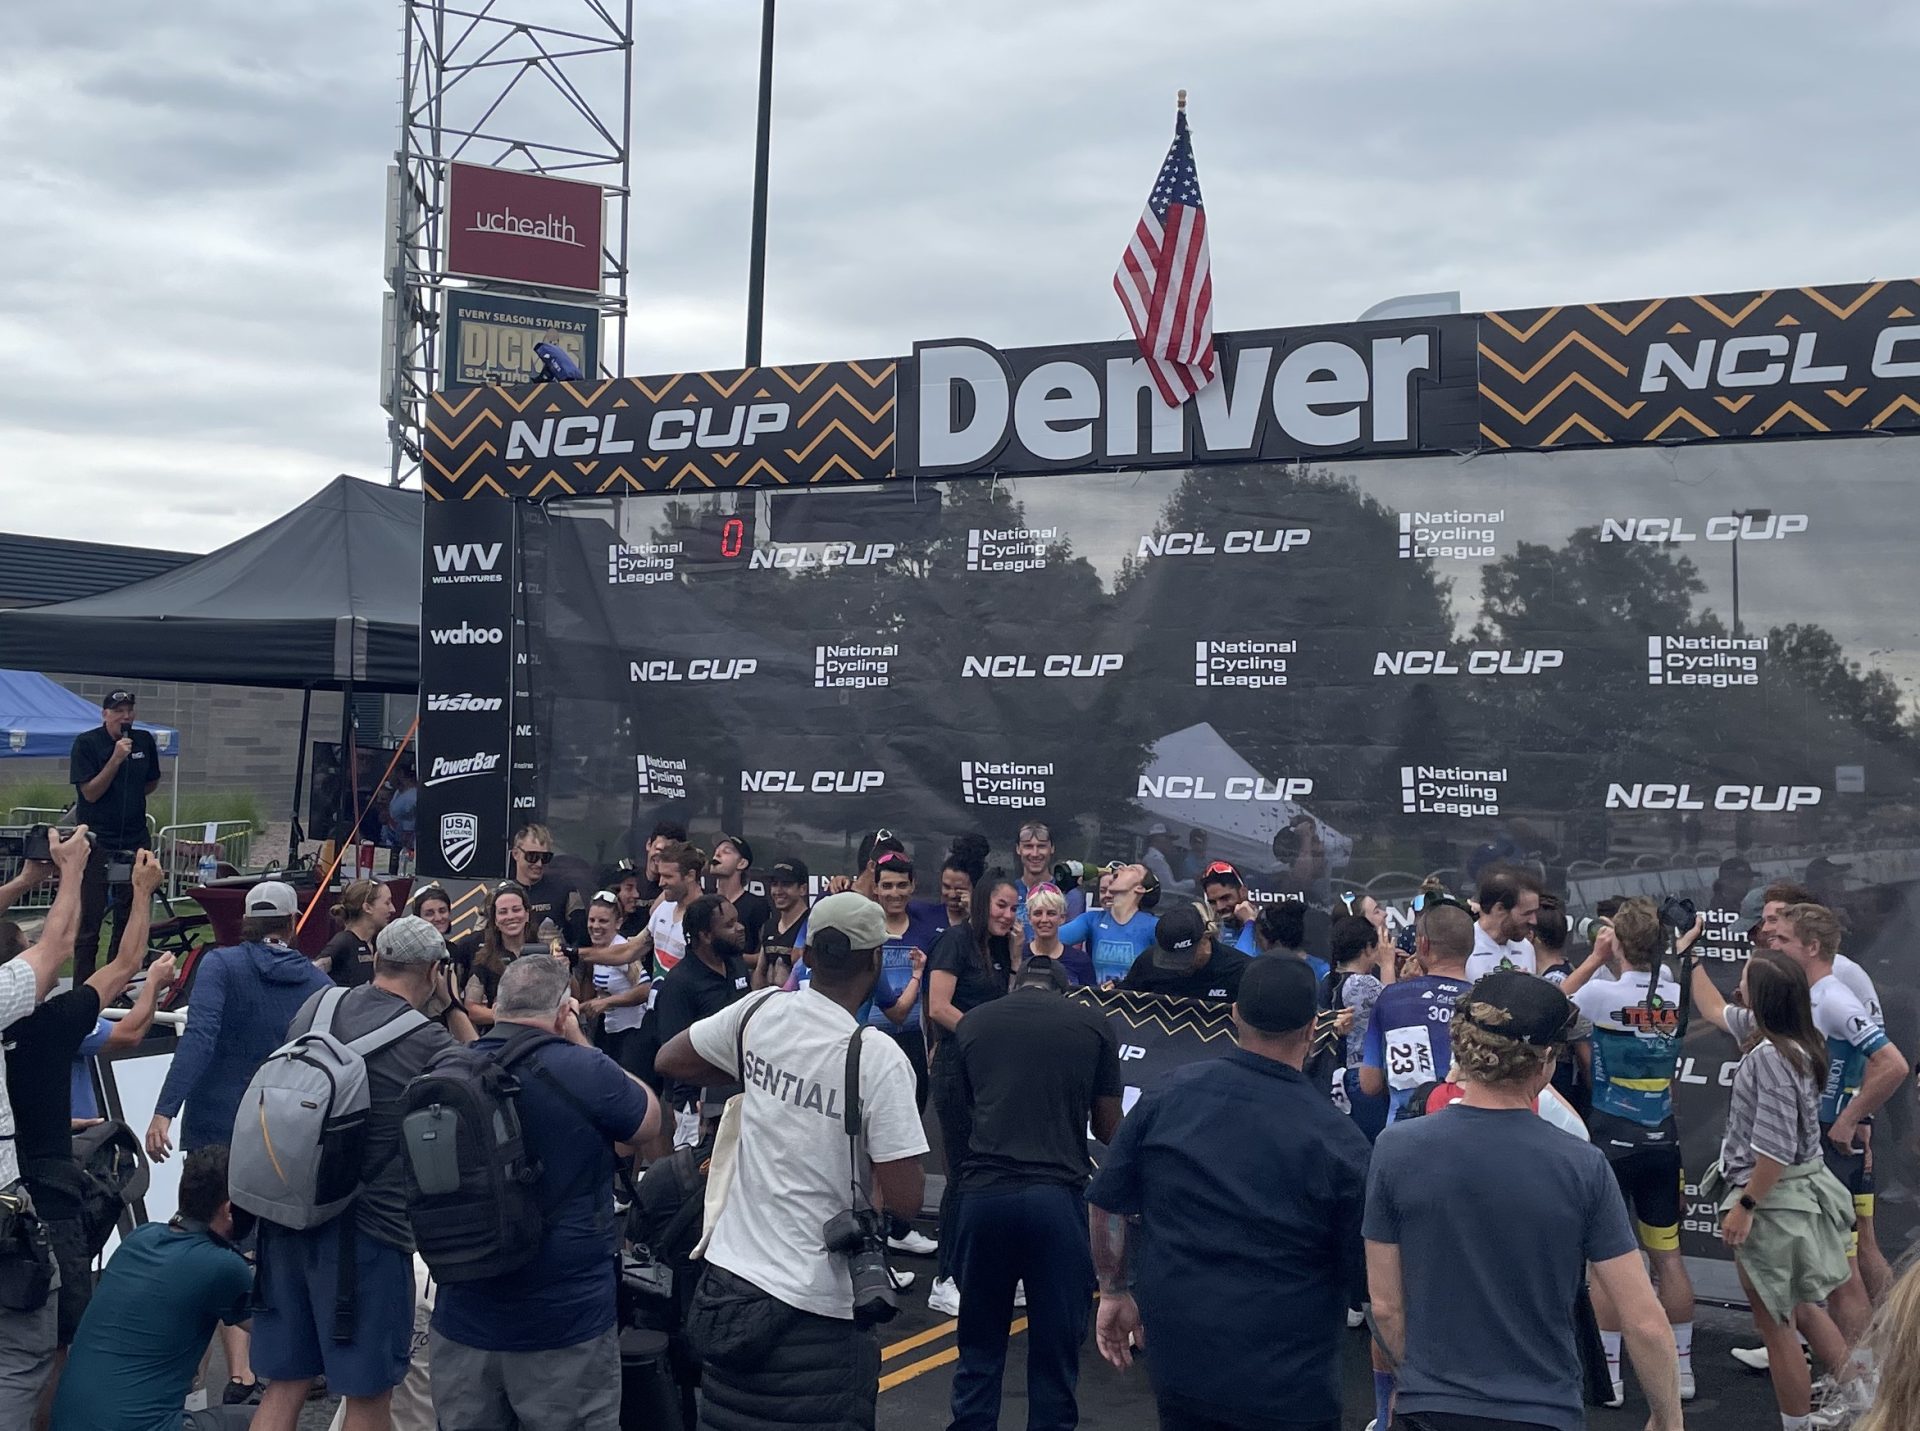 The podium area at the Denver round of the NCL Cup features a line of racers from the Denver Disruptors, Texas Roadhouse-Goldman Sachs, and winning Miami Nights teams. They're surrounded by a few dozen spectators. In the background, race announcer Dave Towle emcees.